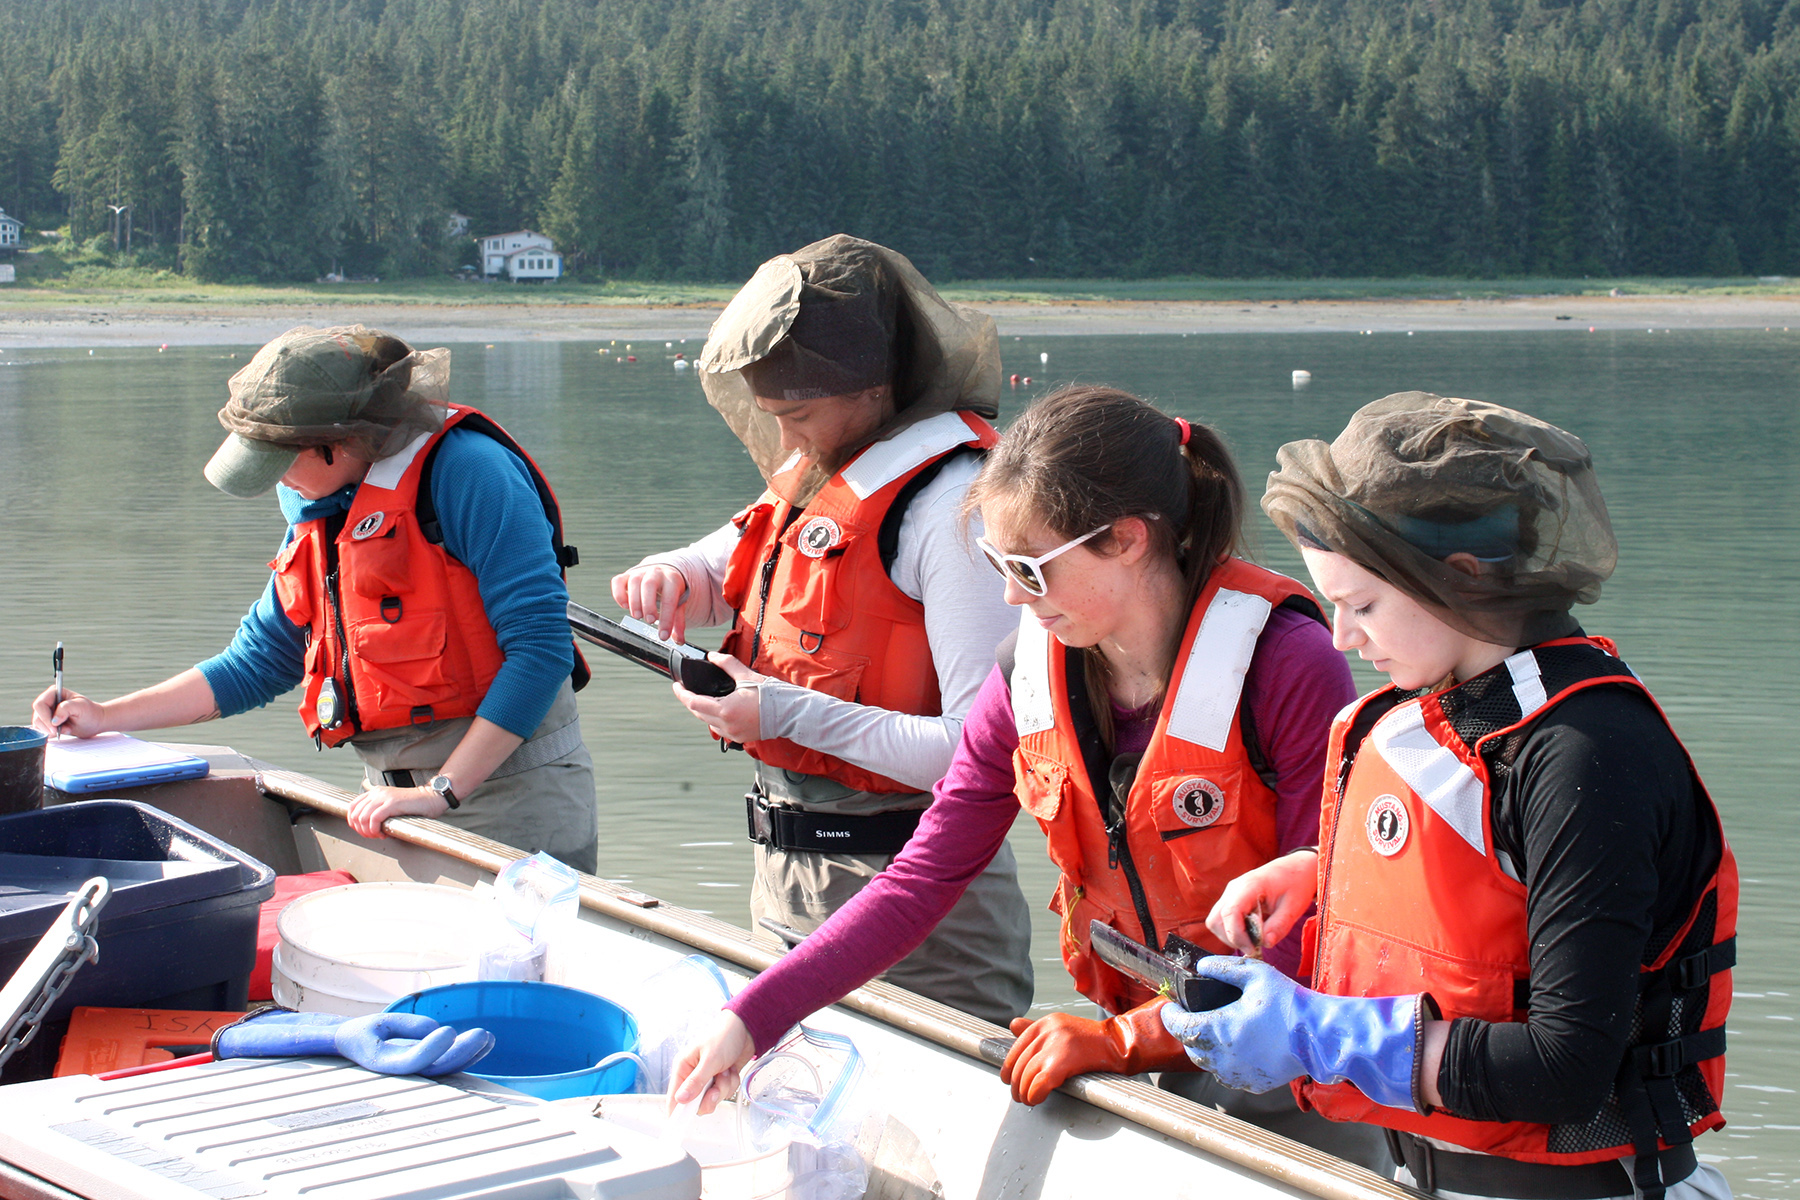 Female students in life jackets and mosquito head-nets record fish data on clipboards while standing beside a boat full of equipment.